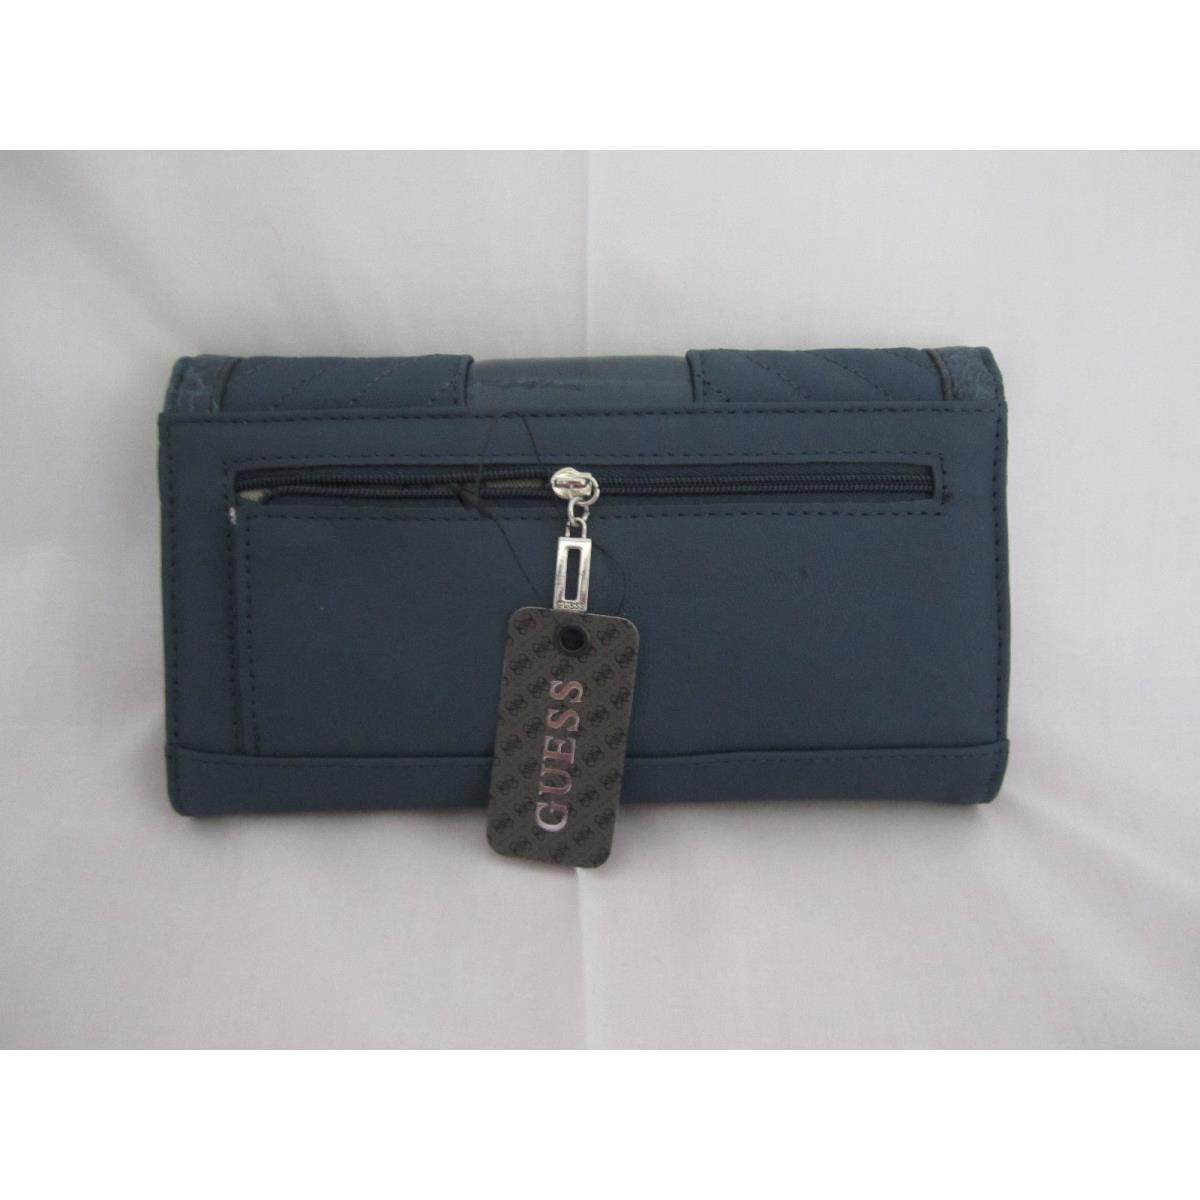 Guess Belicia Slg Checkbook Wallet Blue Style VY357638